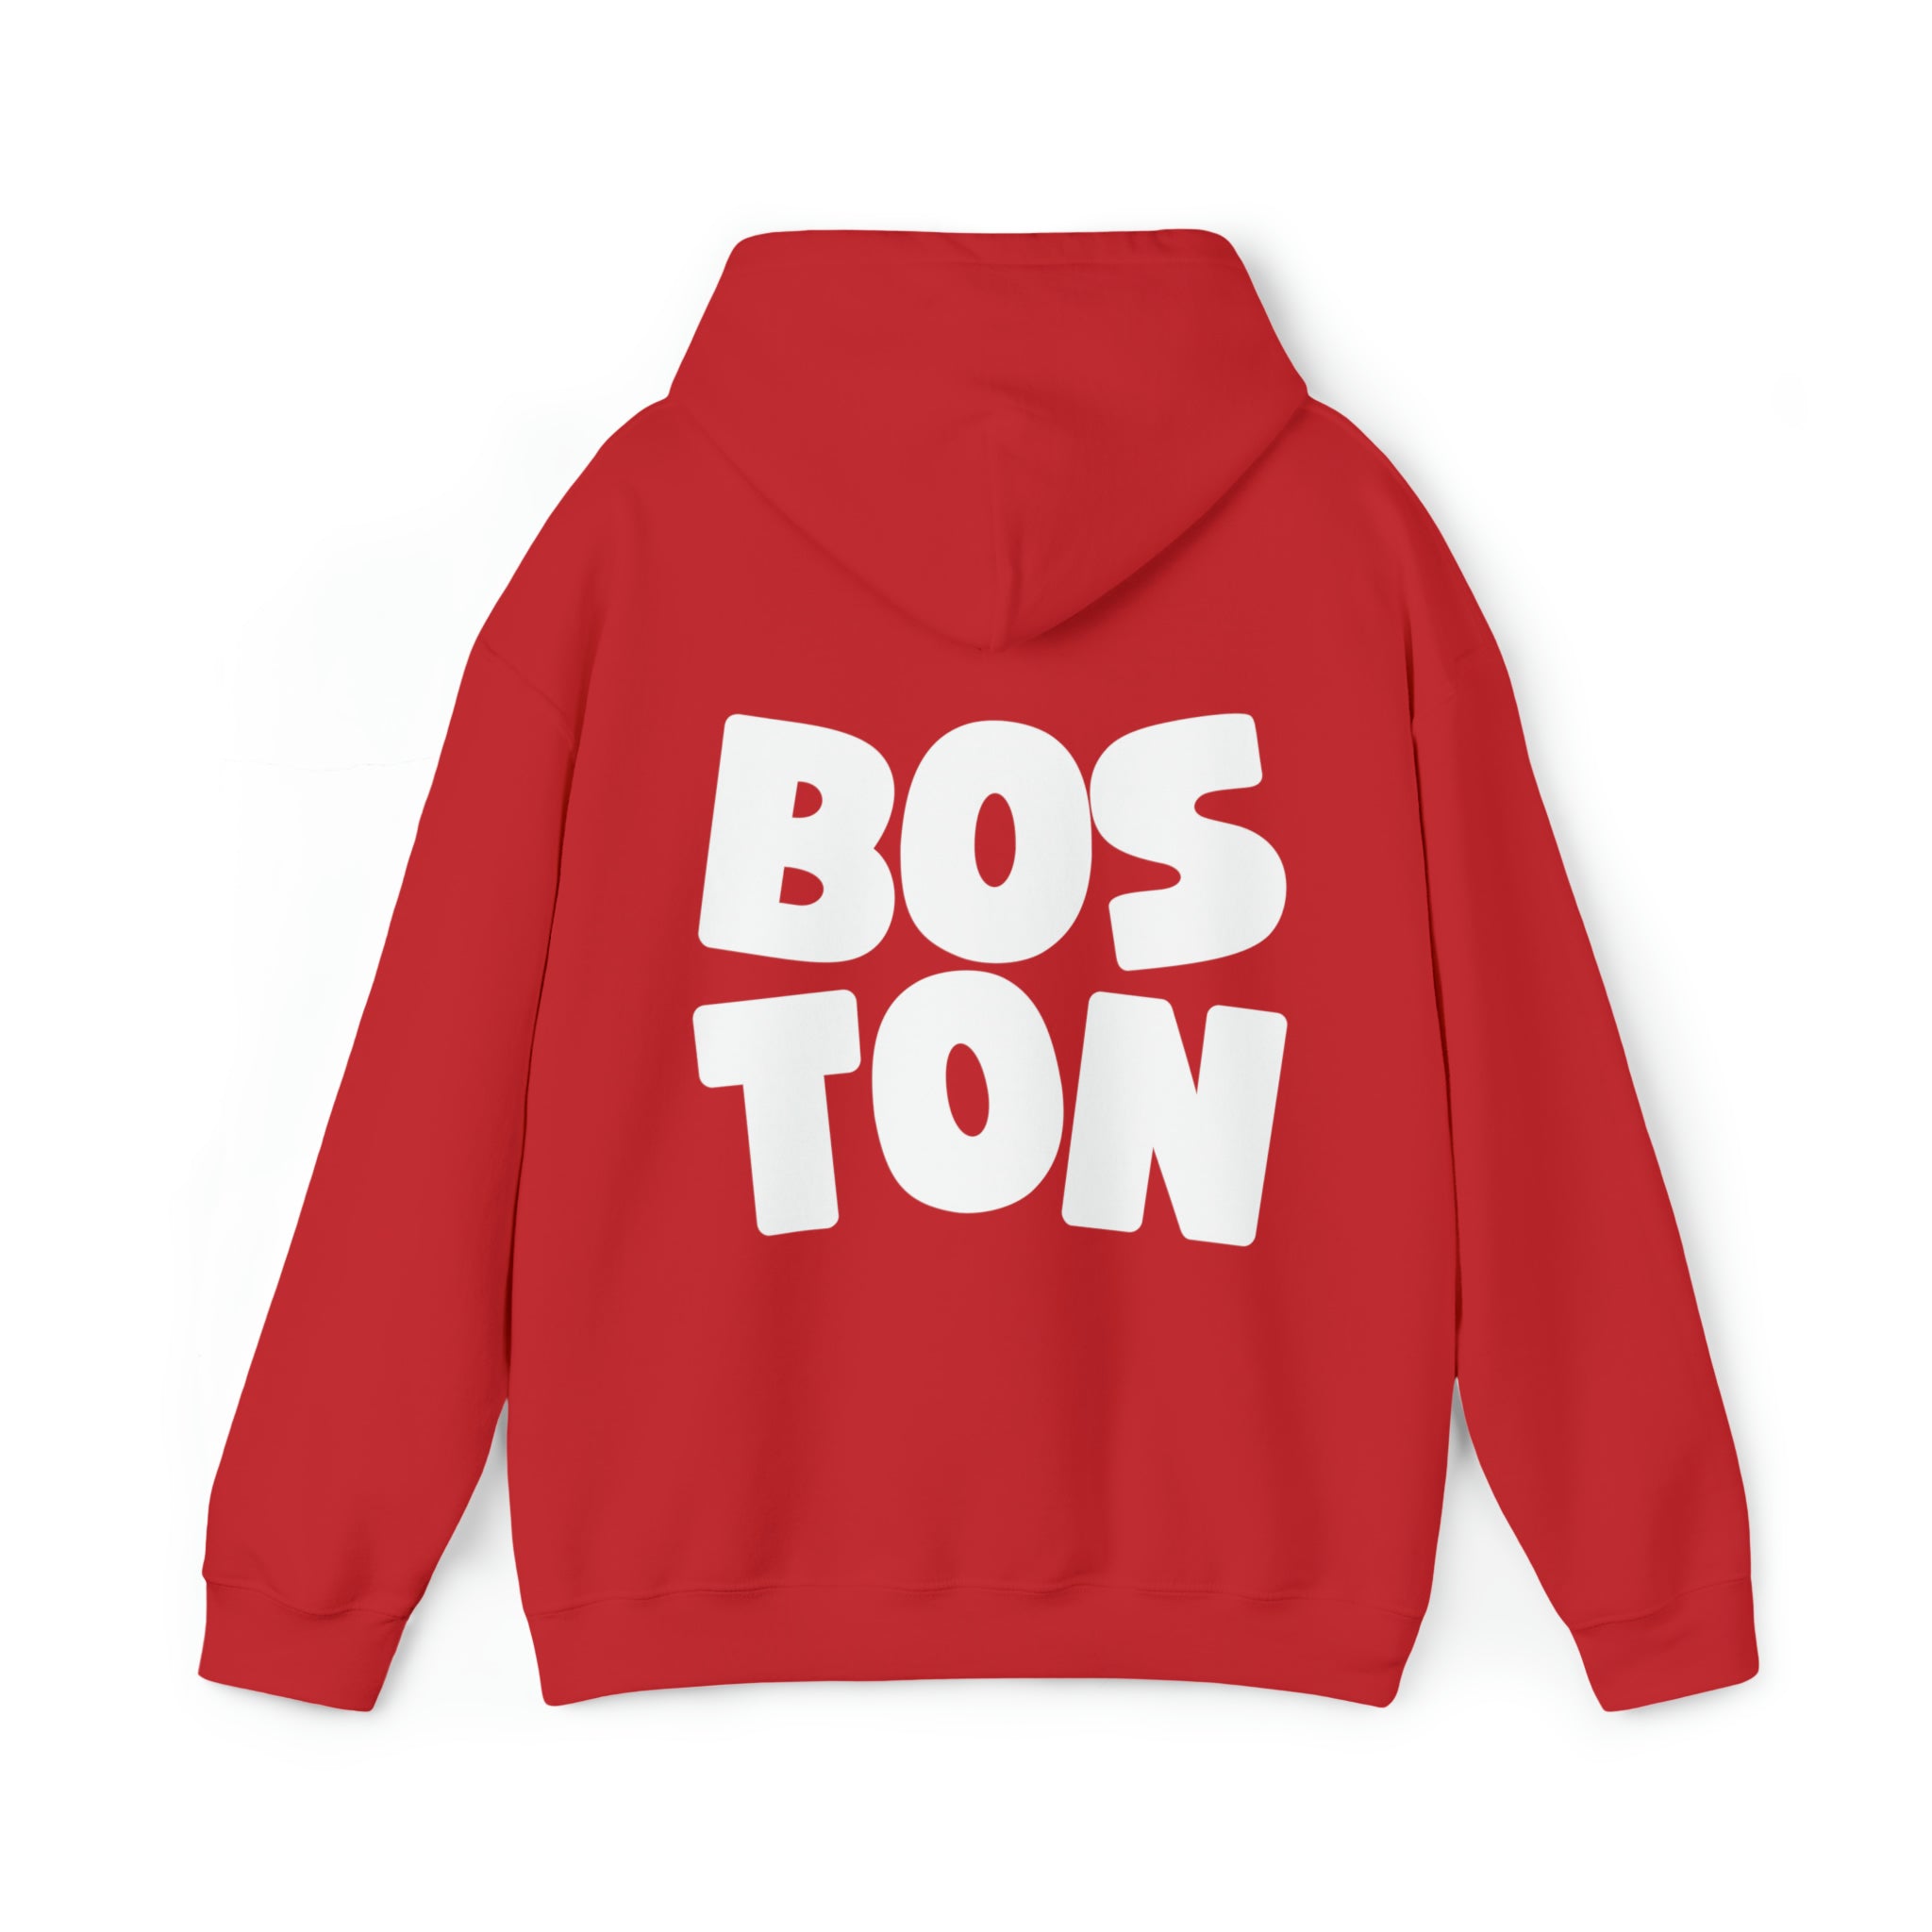 Lifestyle photo of a person wearing the Boston Hoodie Sweatshirt by GS Print Shoppe in an urban setting.